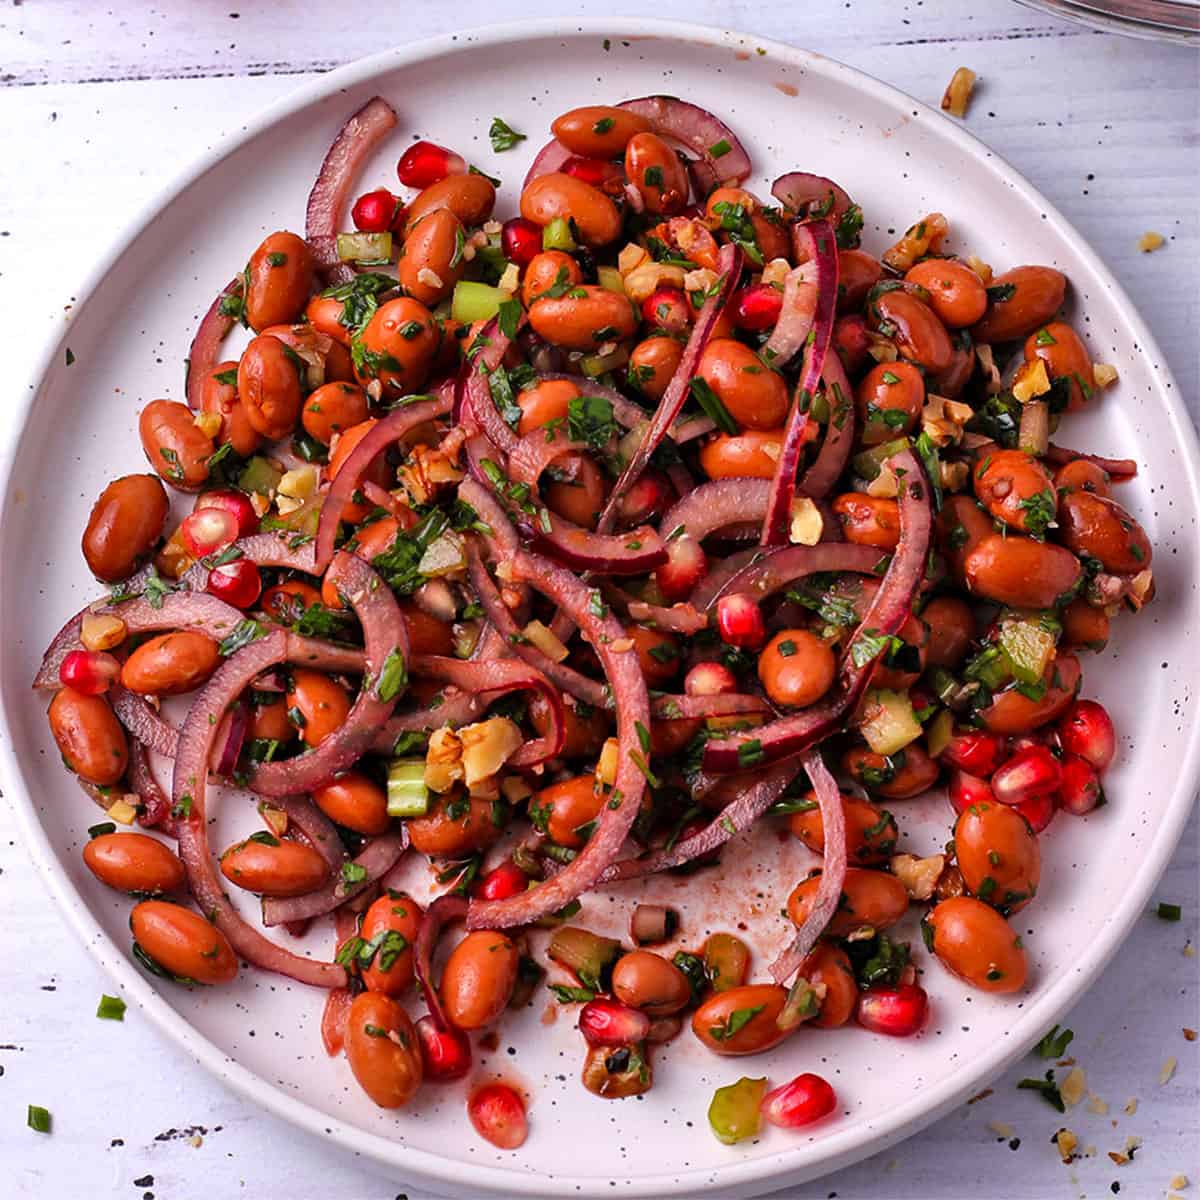 Borlotti bean salad with pomegranate arils and red onions on a white plate.